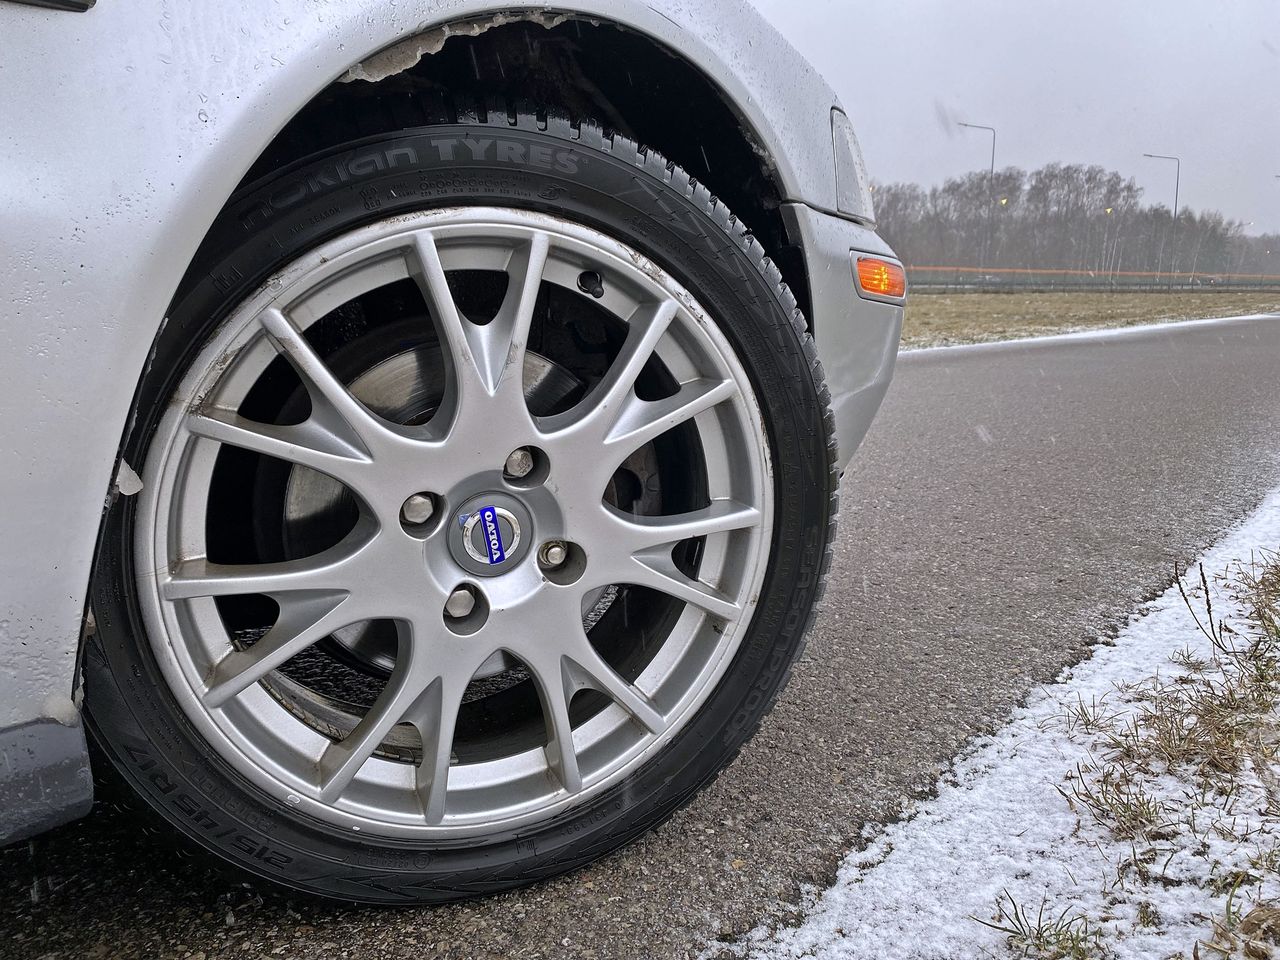 Rise and drawbacks of all-season tires: Longer distances lead to faster wear and tear